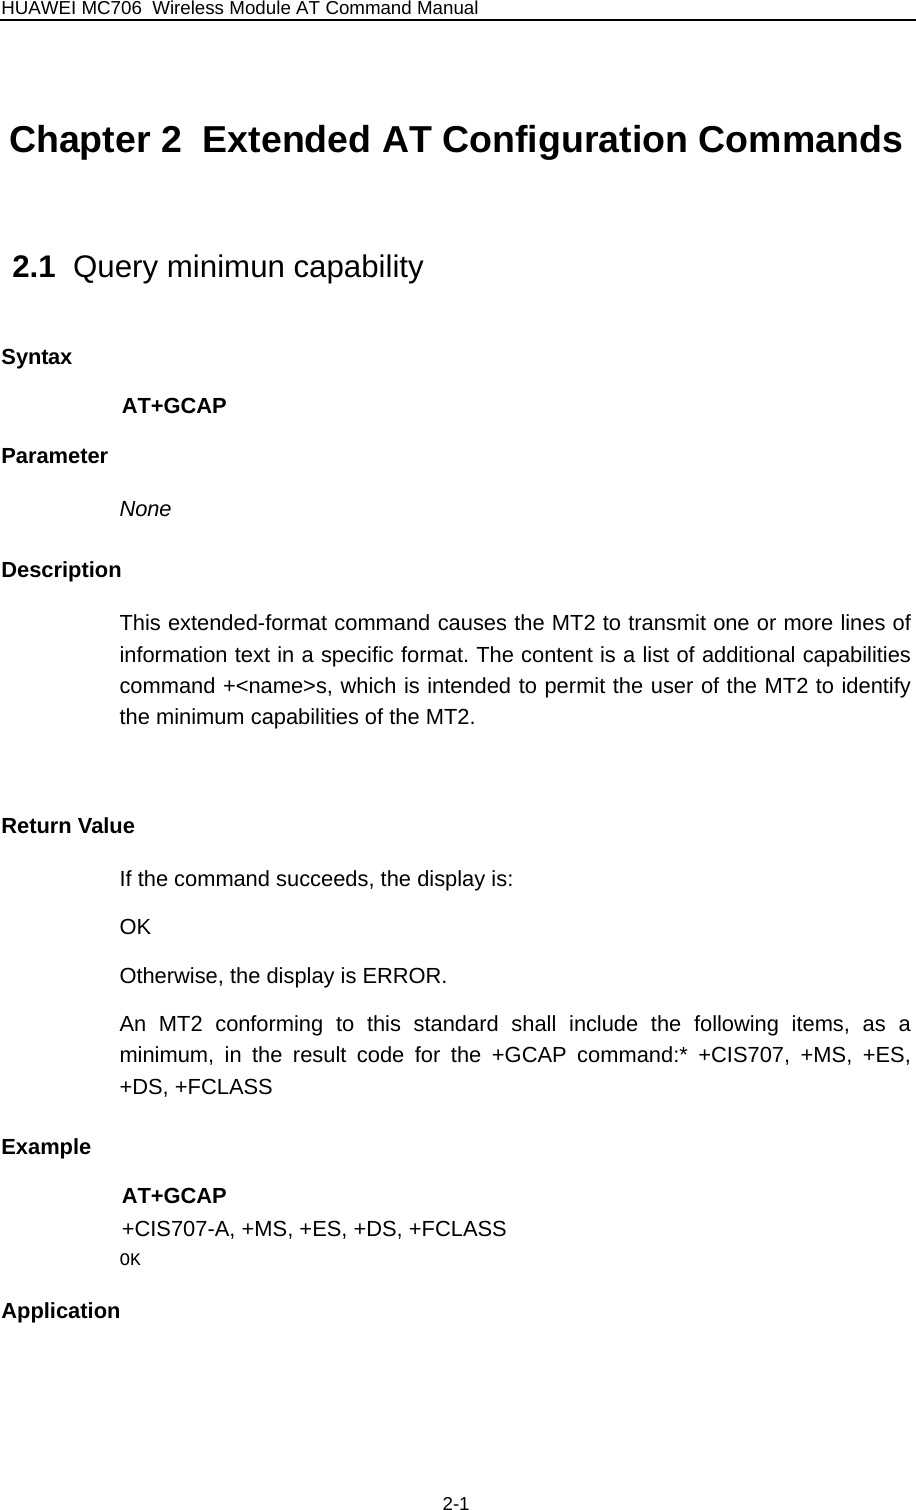 HUAWEI MC706 Wireless Module AT Command Manual Chapter 2  Extended AT Configuration Commands          2.1  Query minimun capability Syntax AT+GCAP Parameter None Description This extended-format command causes the MT2 to transmit one or more lines of information text in a specific format. The content is a list of additional capabilities command +&lt;name&gt;s, which is intended to permit the user of the MT2 to identify the minimum capabilities of the MT2.  Return Value If the command succeeds, the display is: OK Otherwise, the display is ERROR. An MT2 conforming to this standard shall include the following items, as a minimum, in the result code for the +GCAP command:* +CIS707, +MS, +ES, +DS, +FCLASS Example AT+GCAP +CIS707-A, +MS, +ES, +DS, +FCLASS OK Application  2-1 